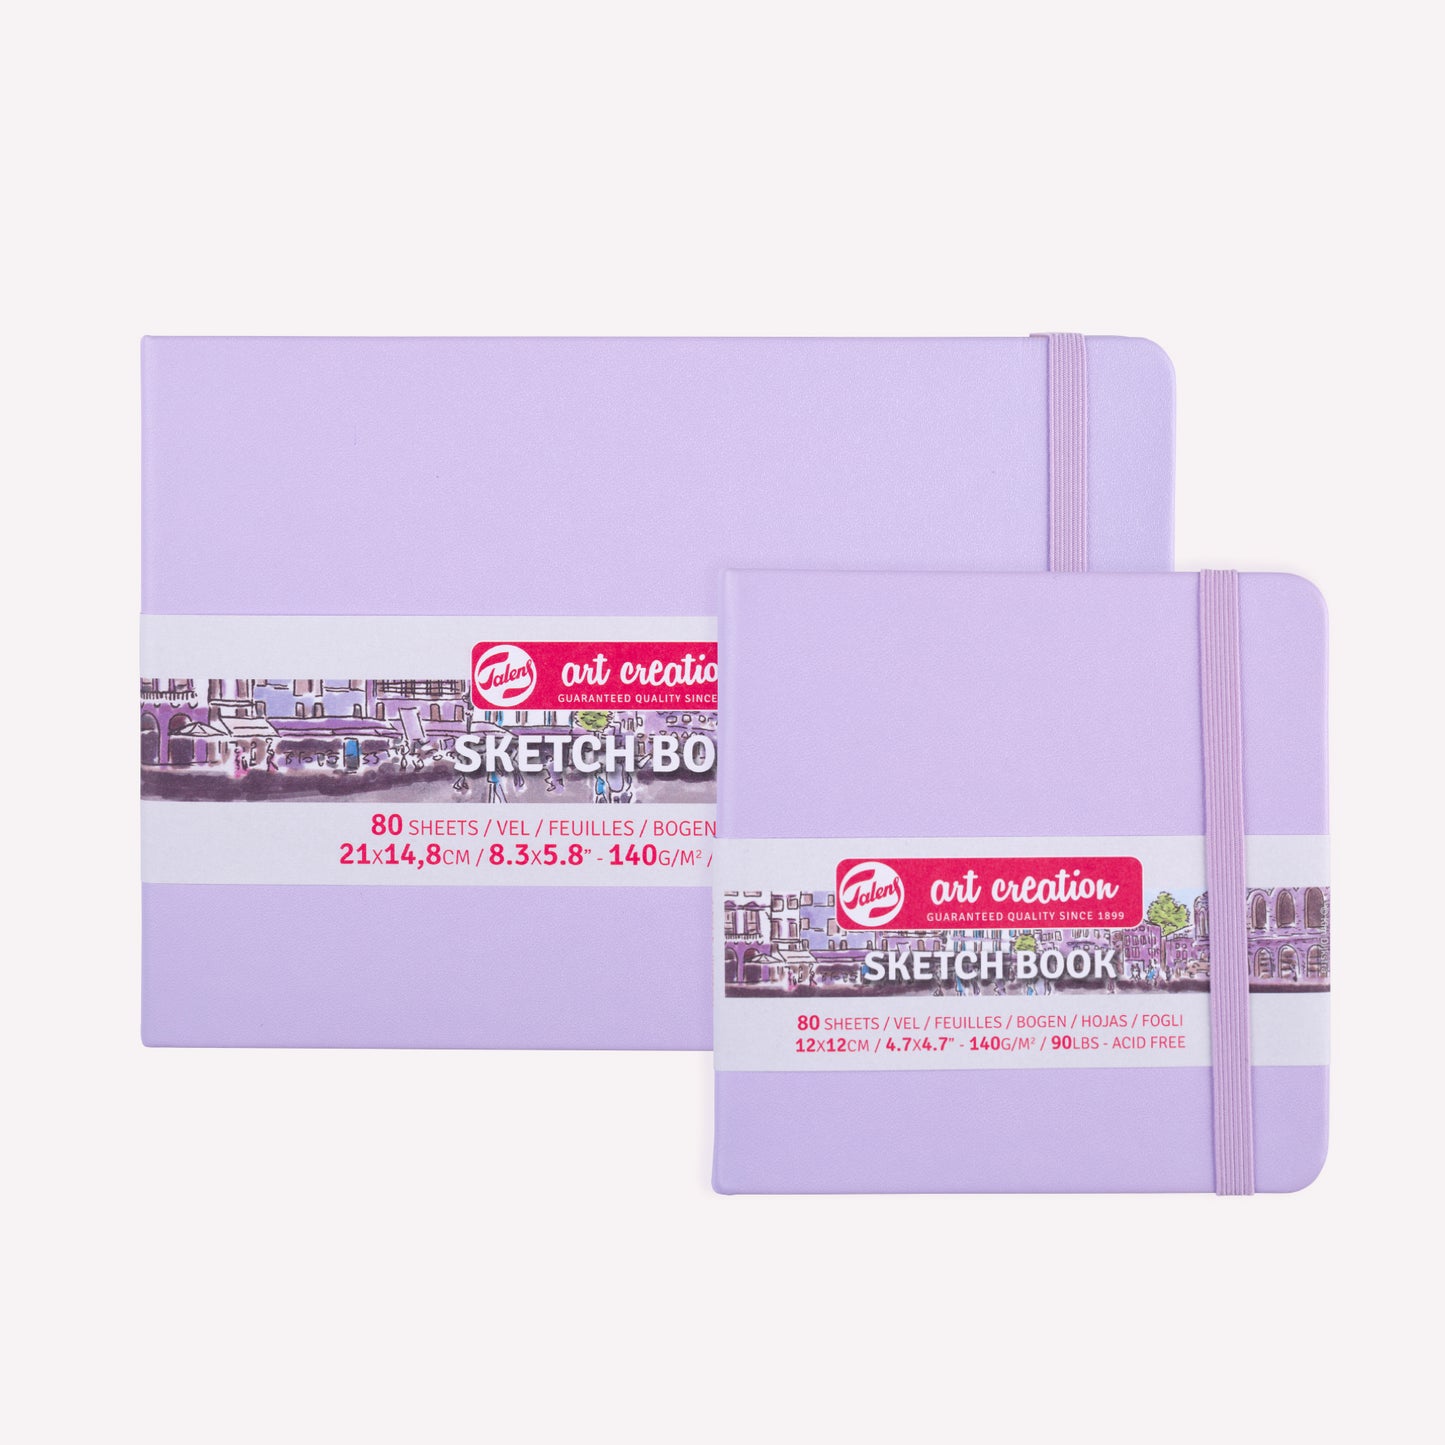 Royal Talens Art Creation Sketchbooks with a sturdy Pastel Violet imitation-leather cover, available in 21x14.8cm and 12x12cm.